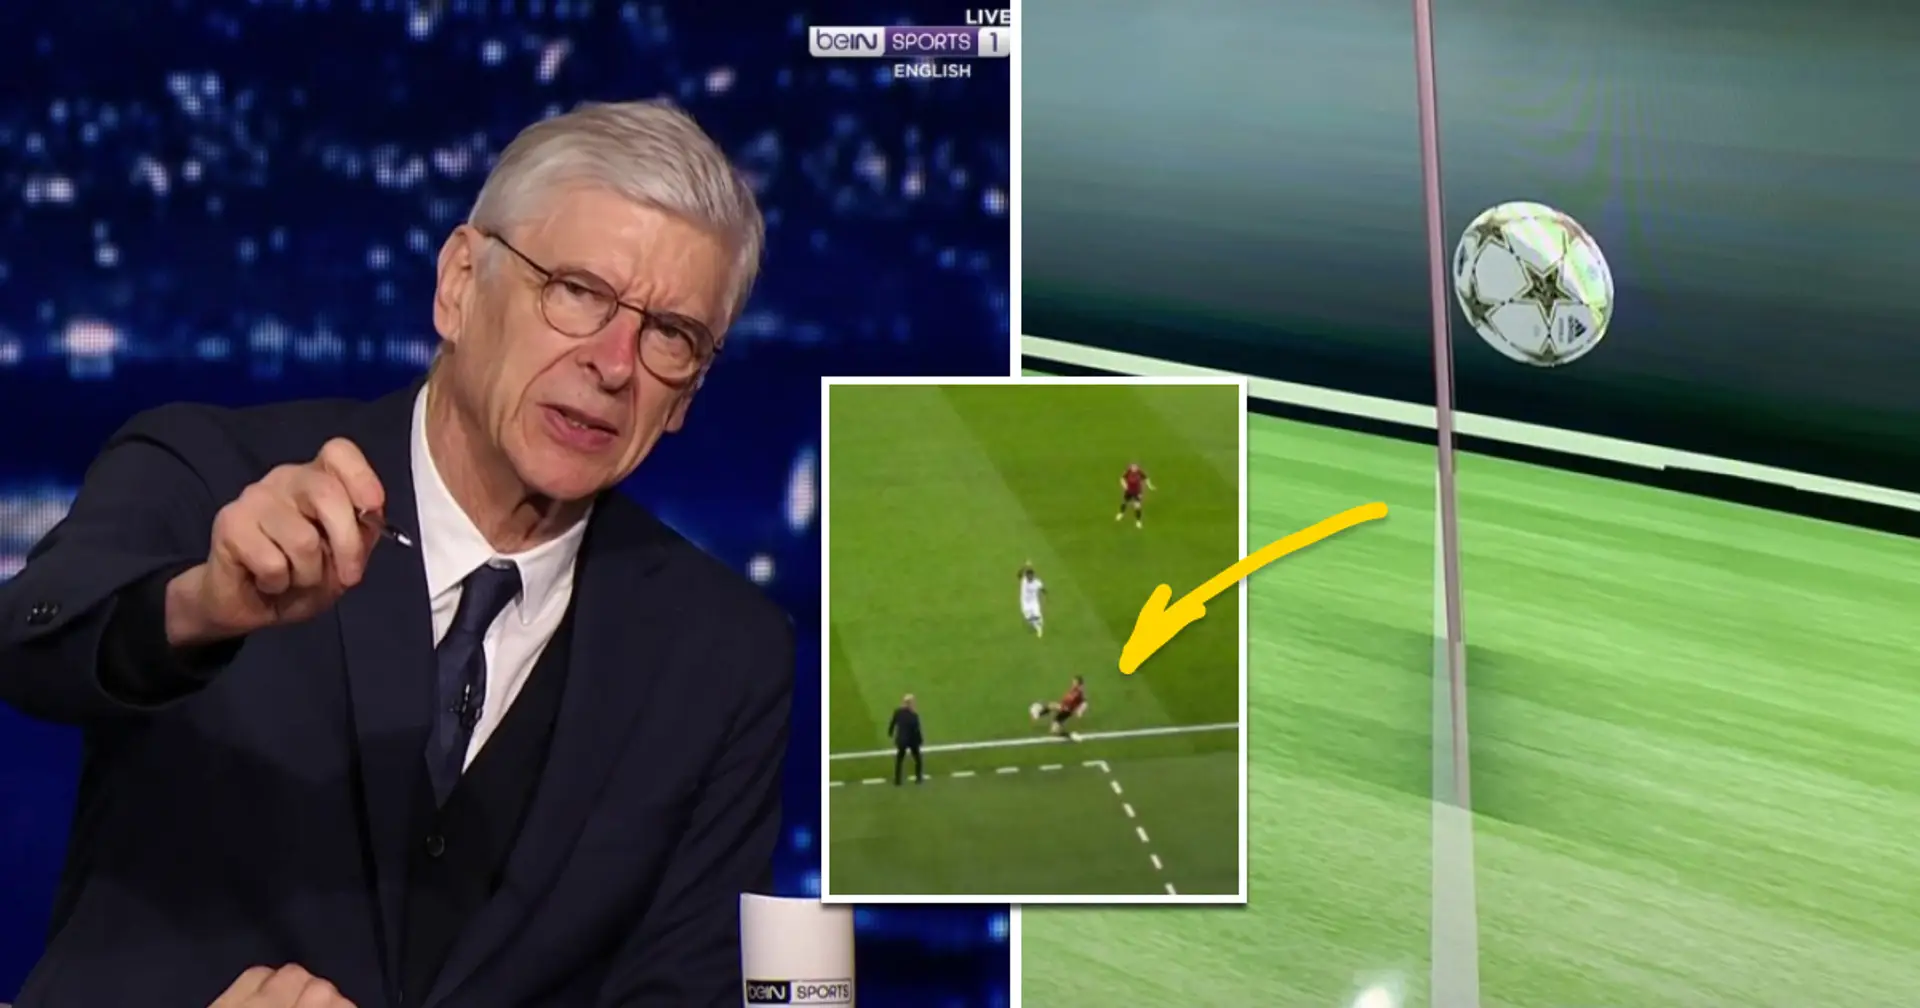 Arsene Wenger reacts to Man City goal controversy against Real Madrid — he seems spot-on